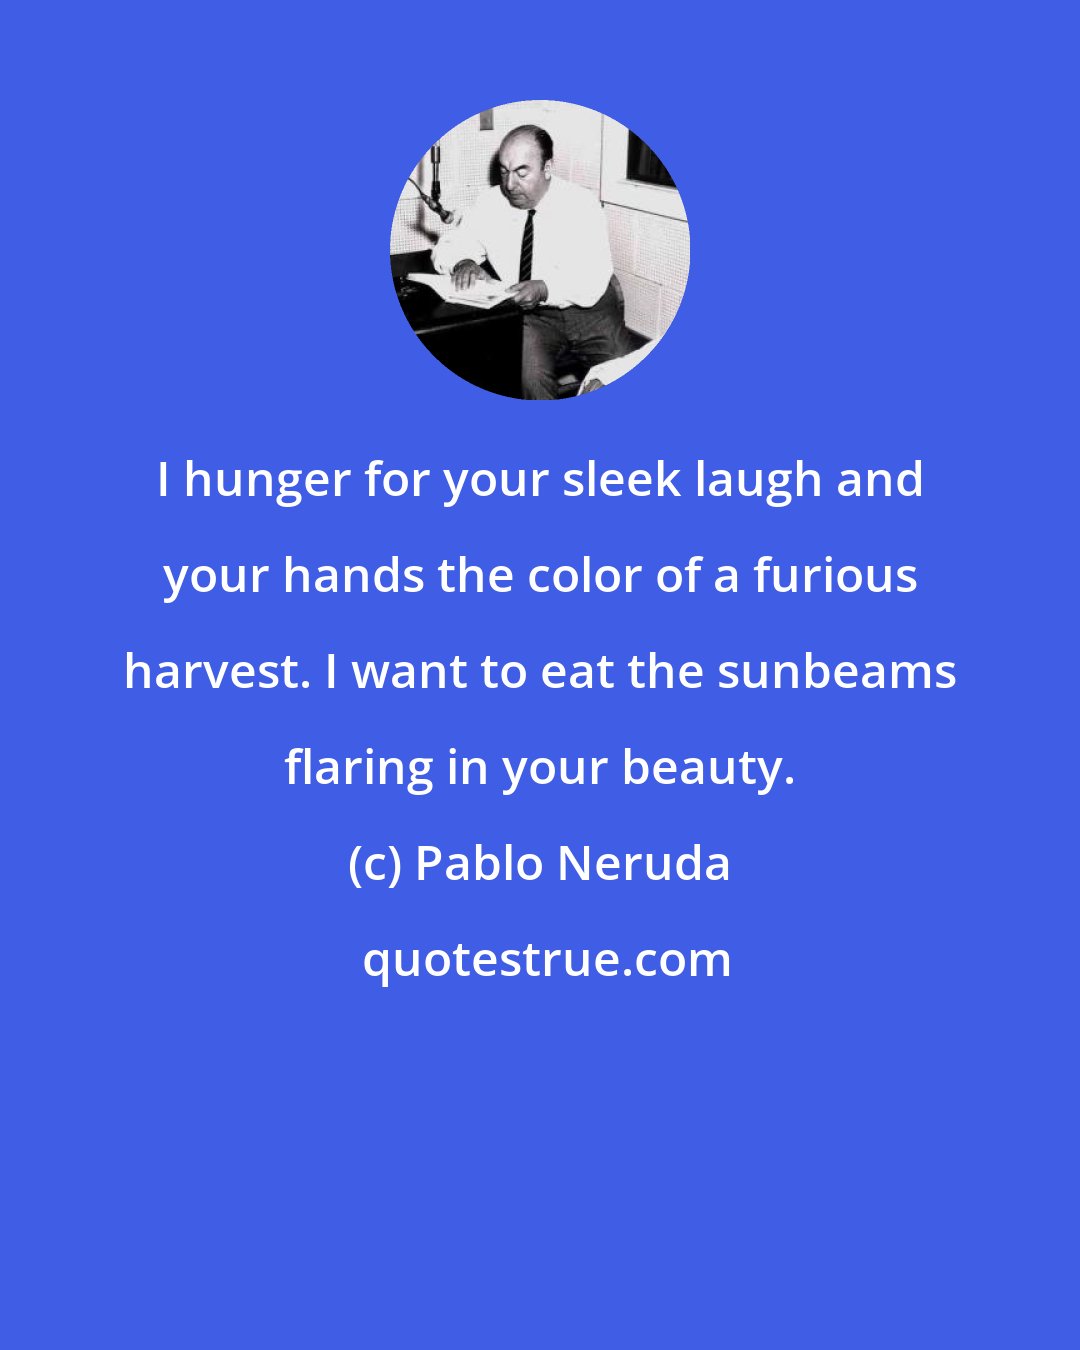 Pablo Neruda: I hunger for your sleek laugh and your hands the color of a furious harvest. I want to eat the sunbeams flaring in your beauty.